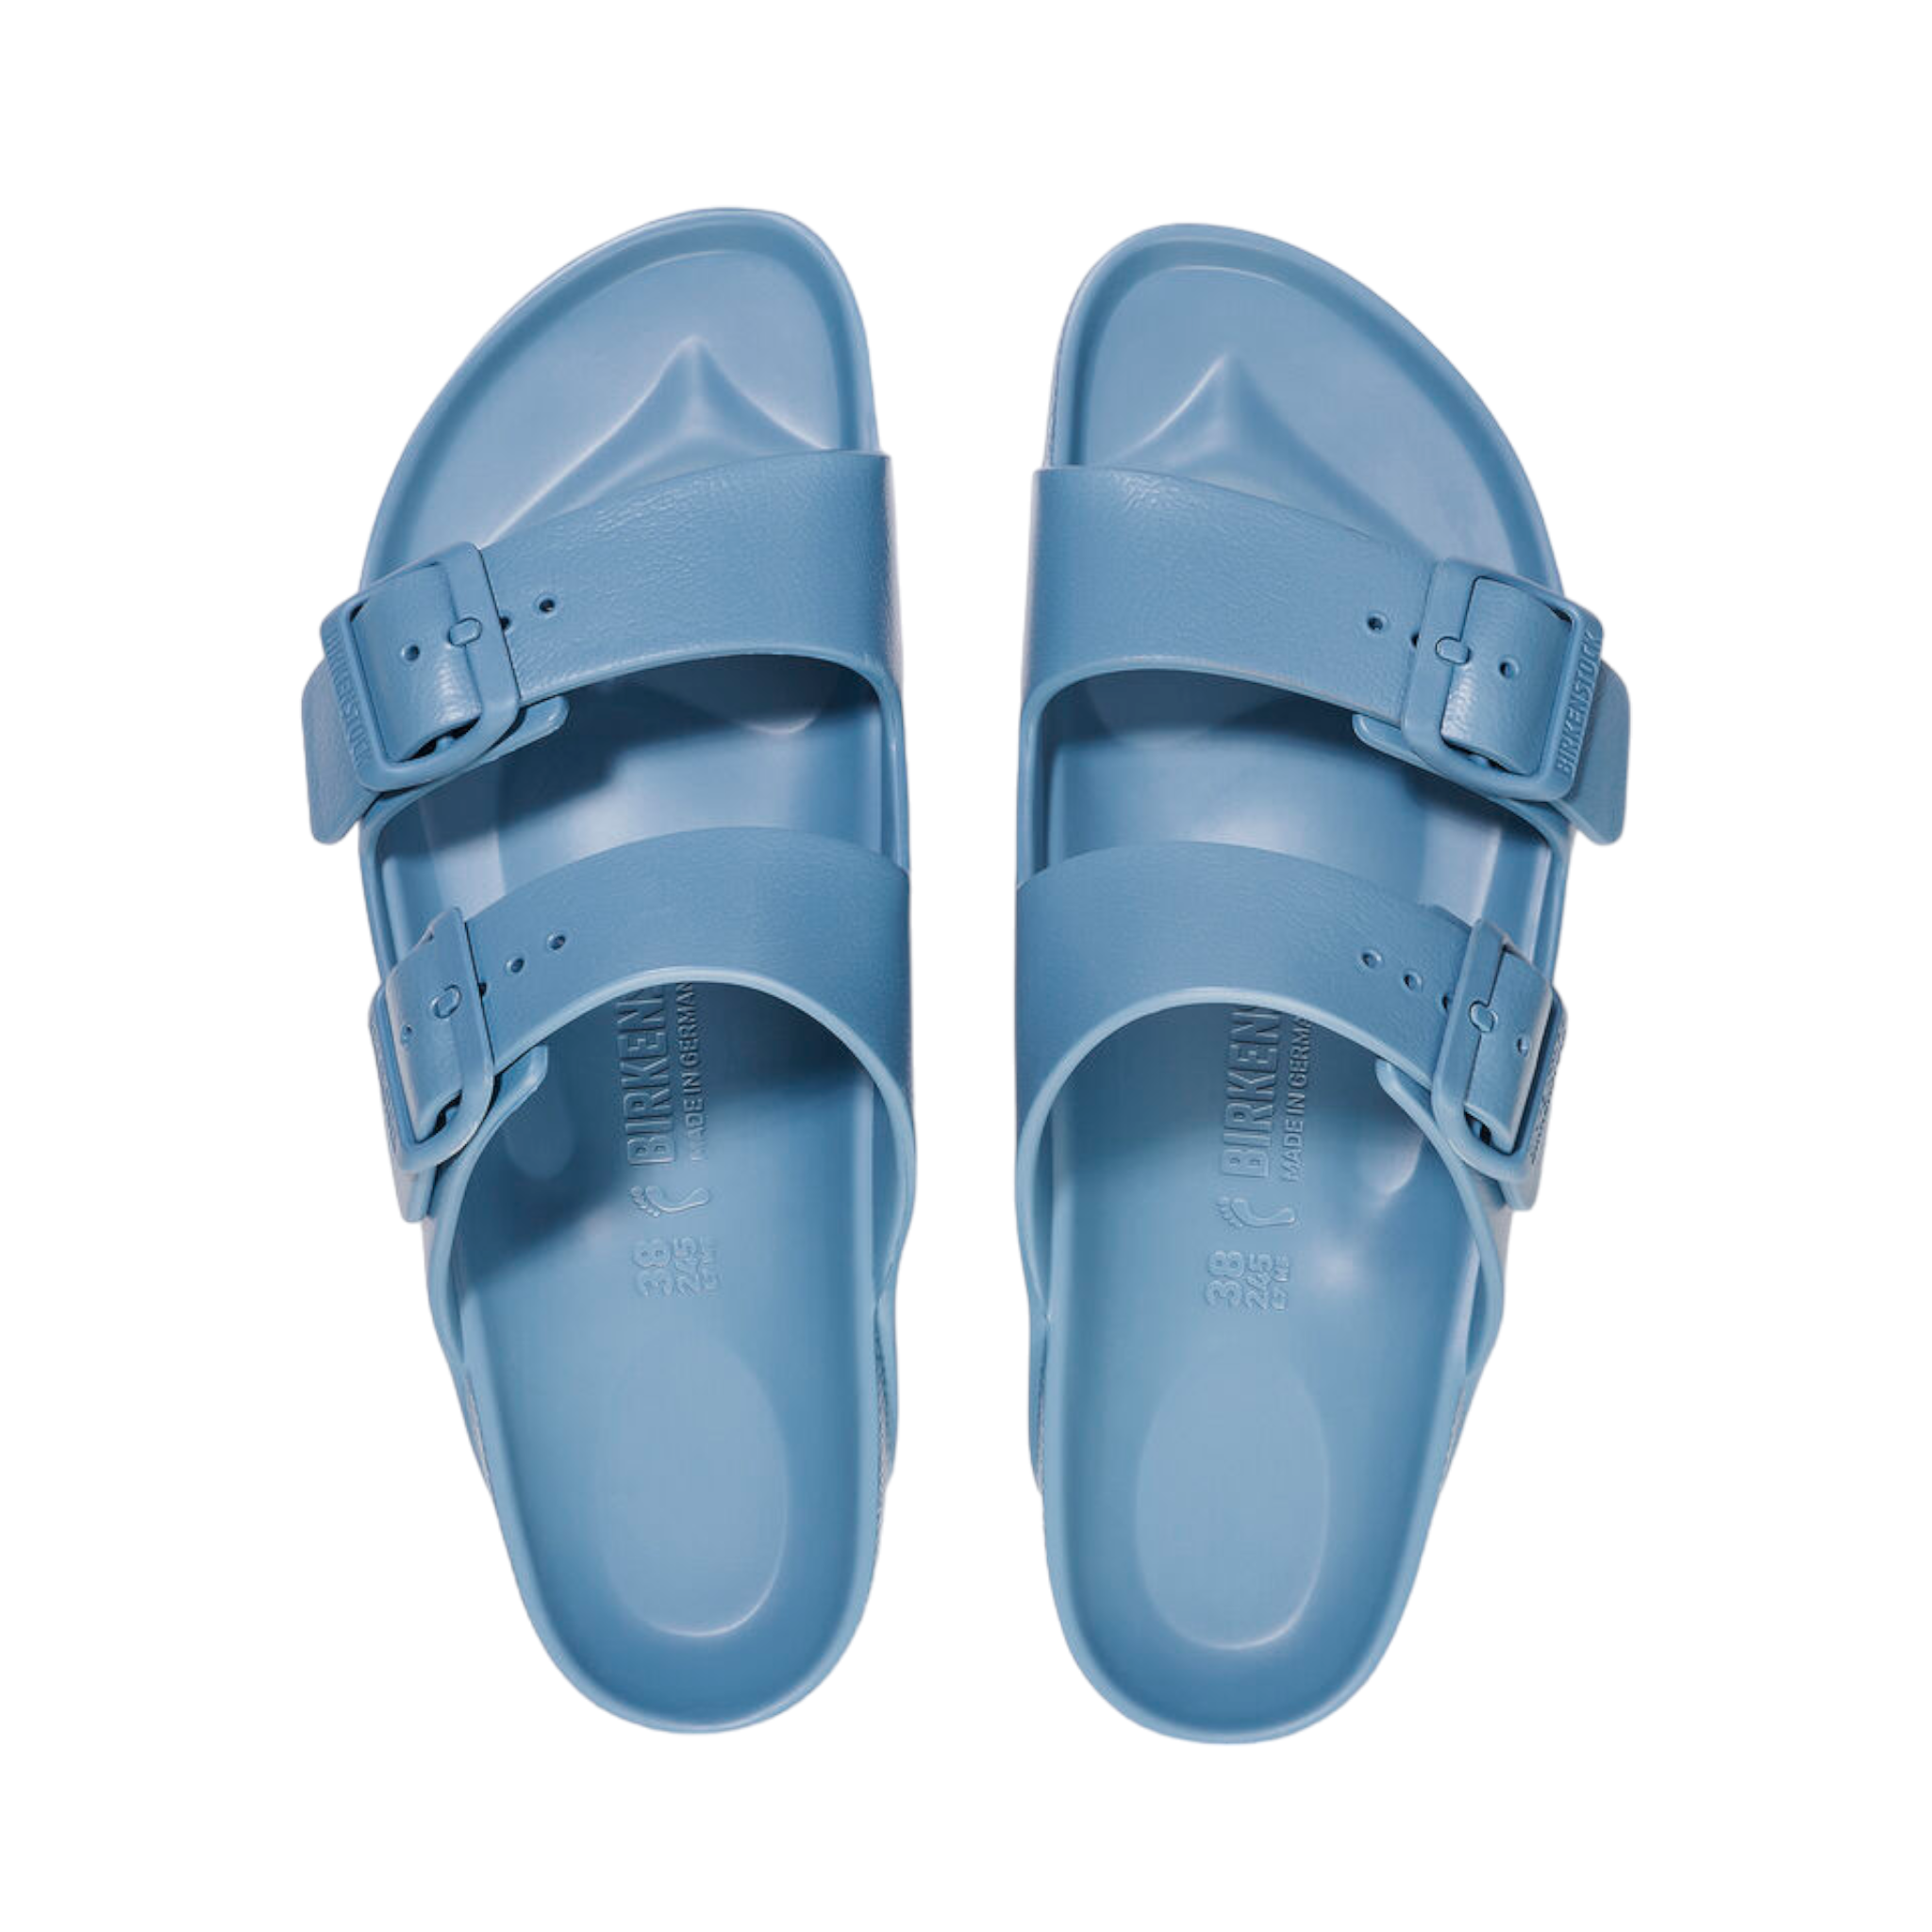 Top view of Elemental blue Arizona Sandal from Birkenstock. Two buckles straps over the top of the foot. Buckle is blue. Shop Online and In-store with shoe&amp;me Mount Maunganui. 